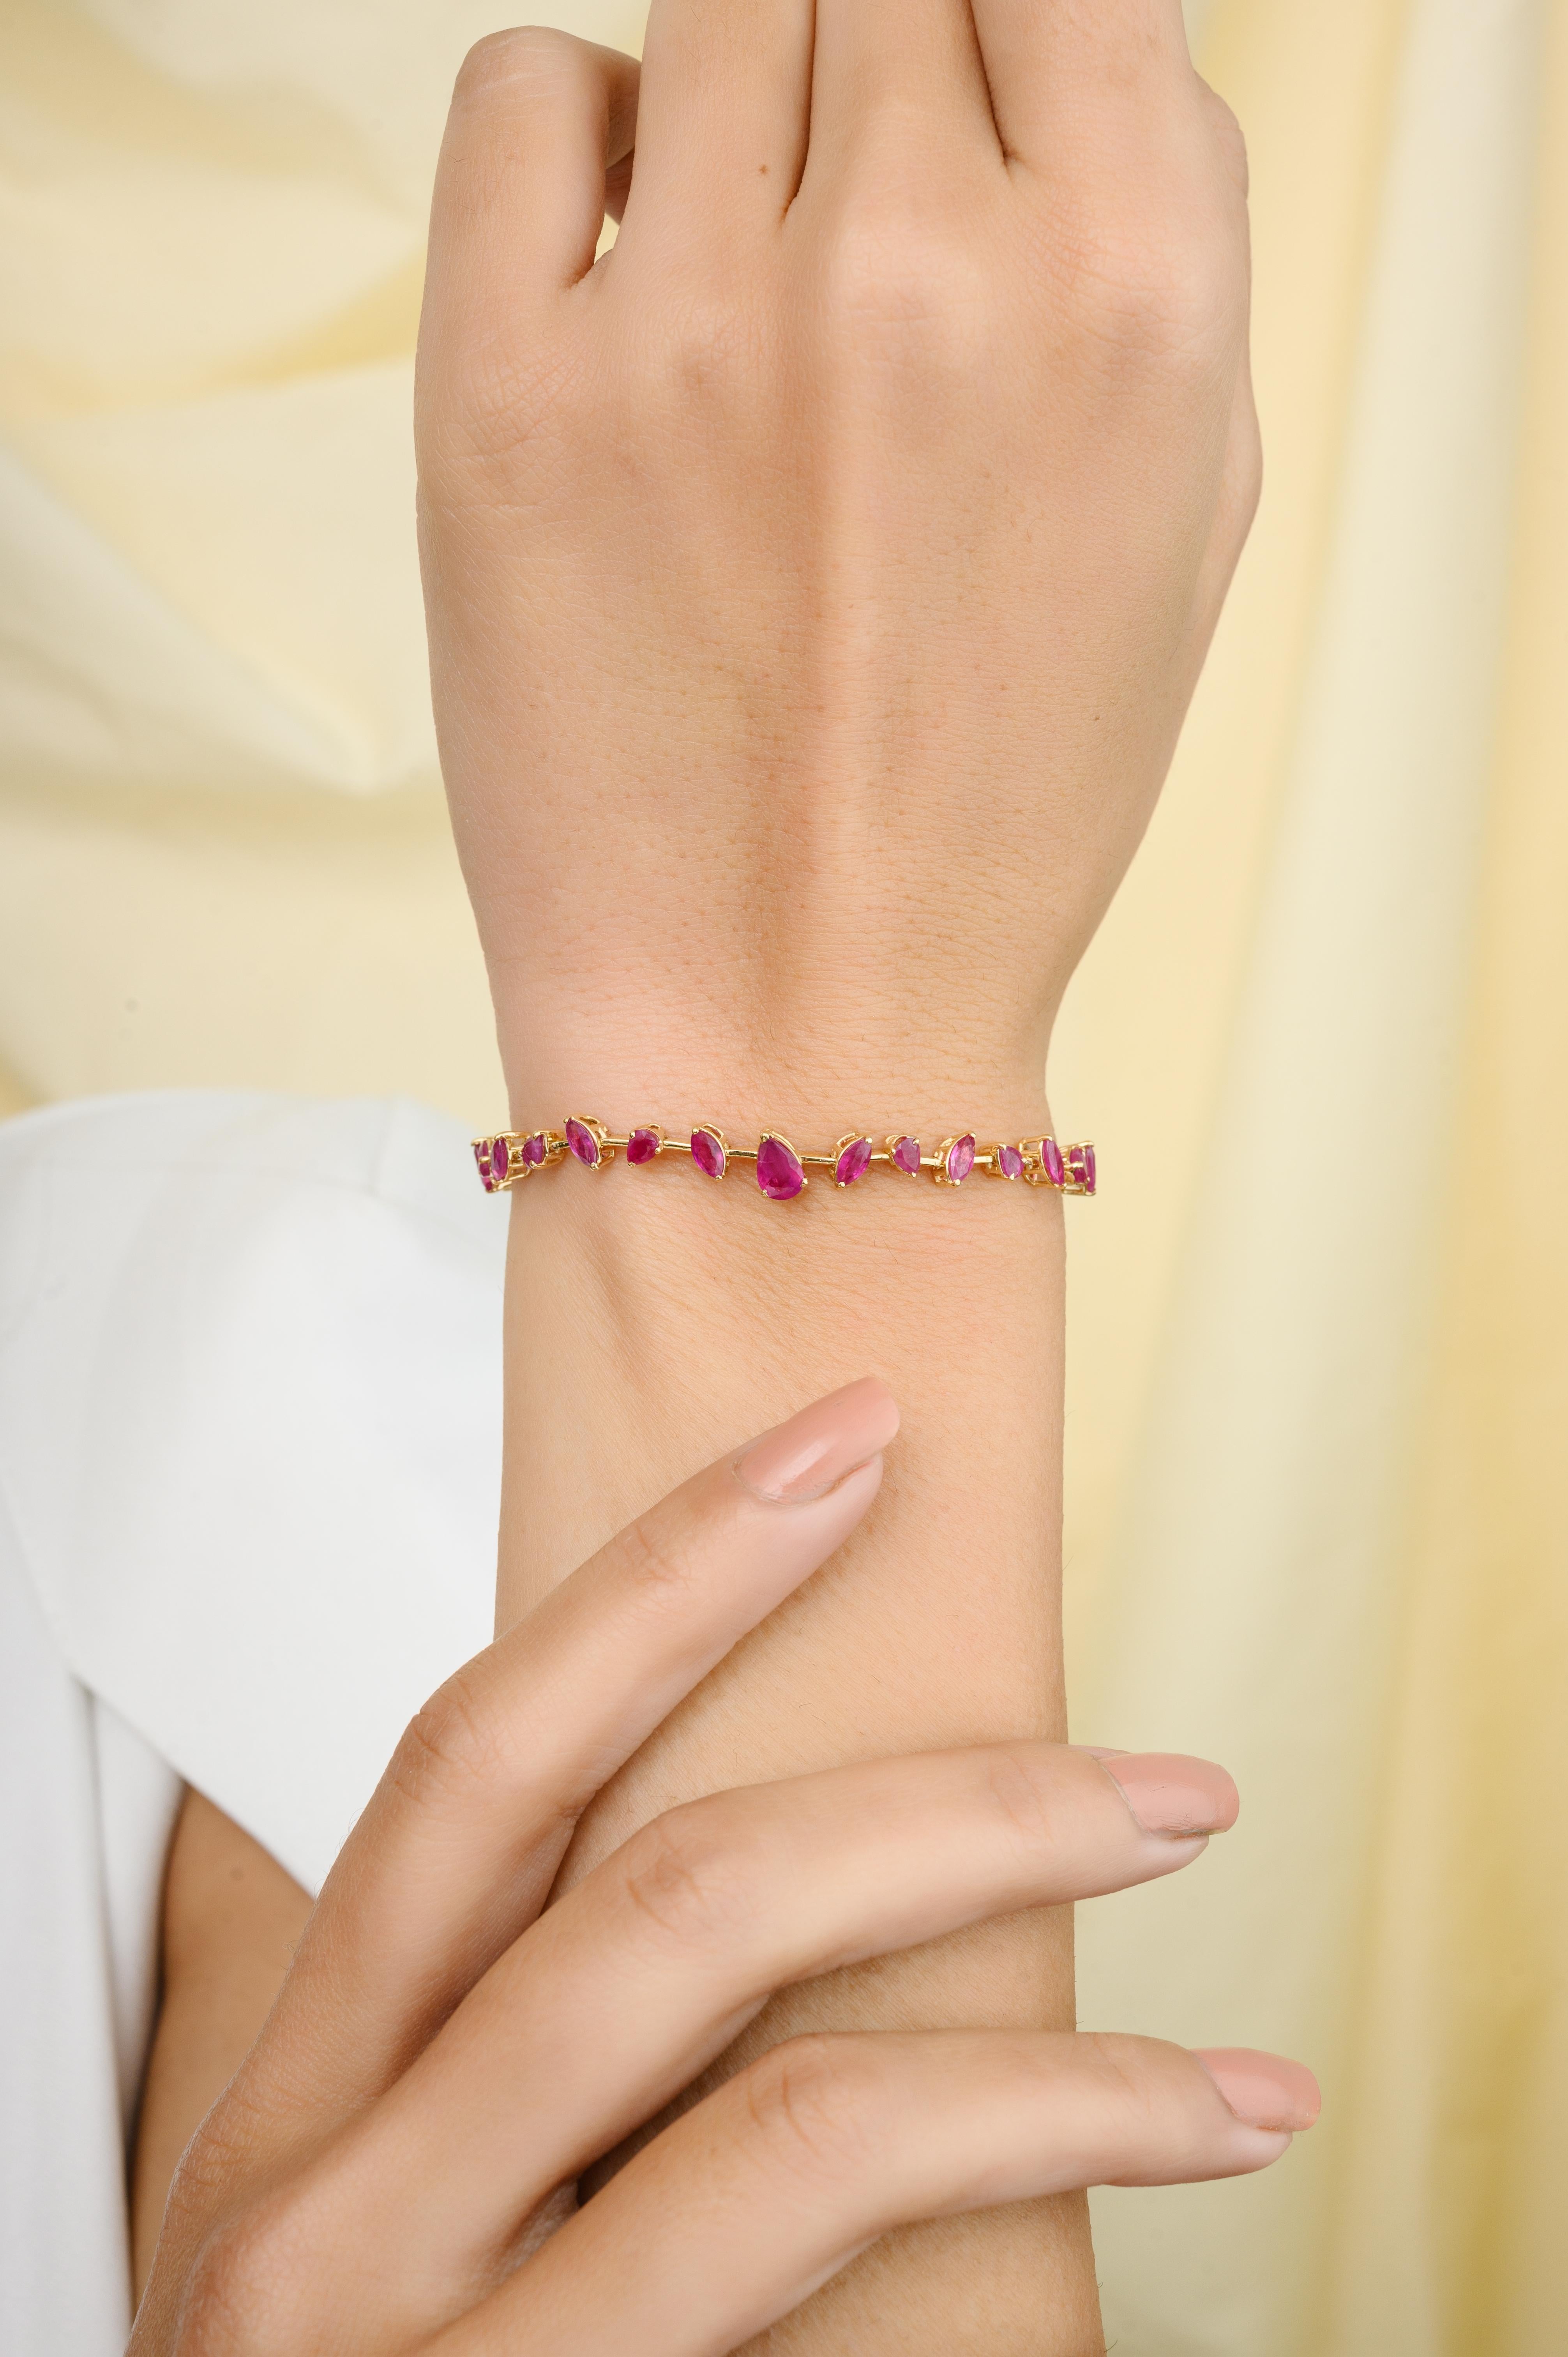 This Genuine Ruby July Birthstone Bracelet in 18K gold showcases 4.57 carats endlessly sparkling natural ruby. It measures 7 inches long in length. 
Ruby improves mental strength. 
Designed with perfect mixed cut ruby in solid gold making a minimal